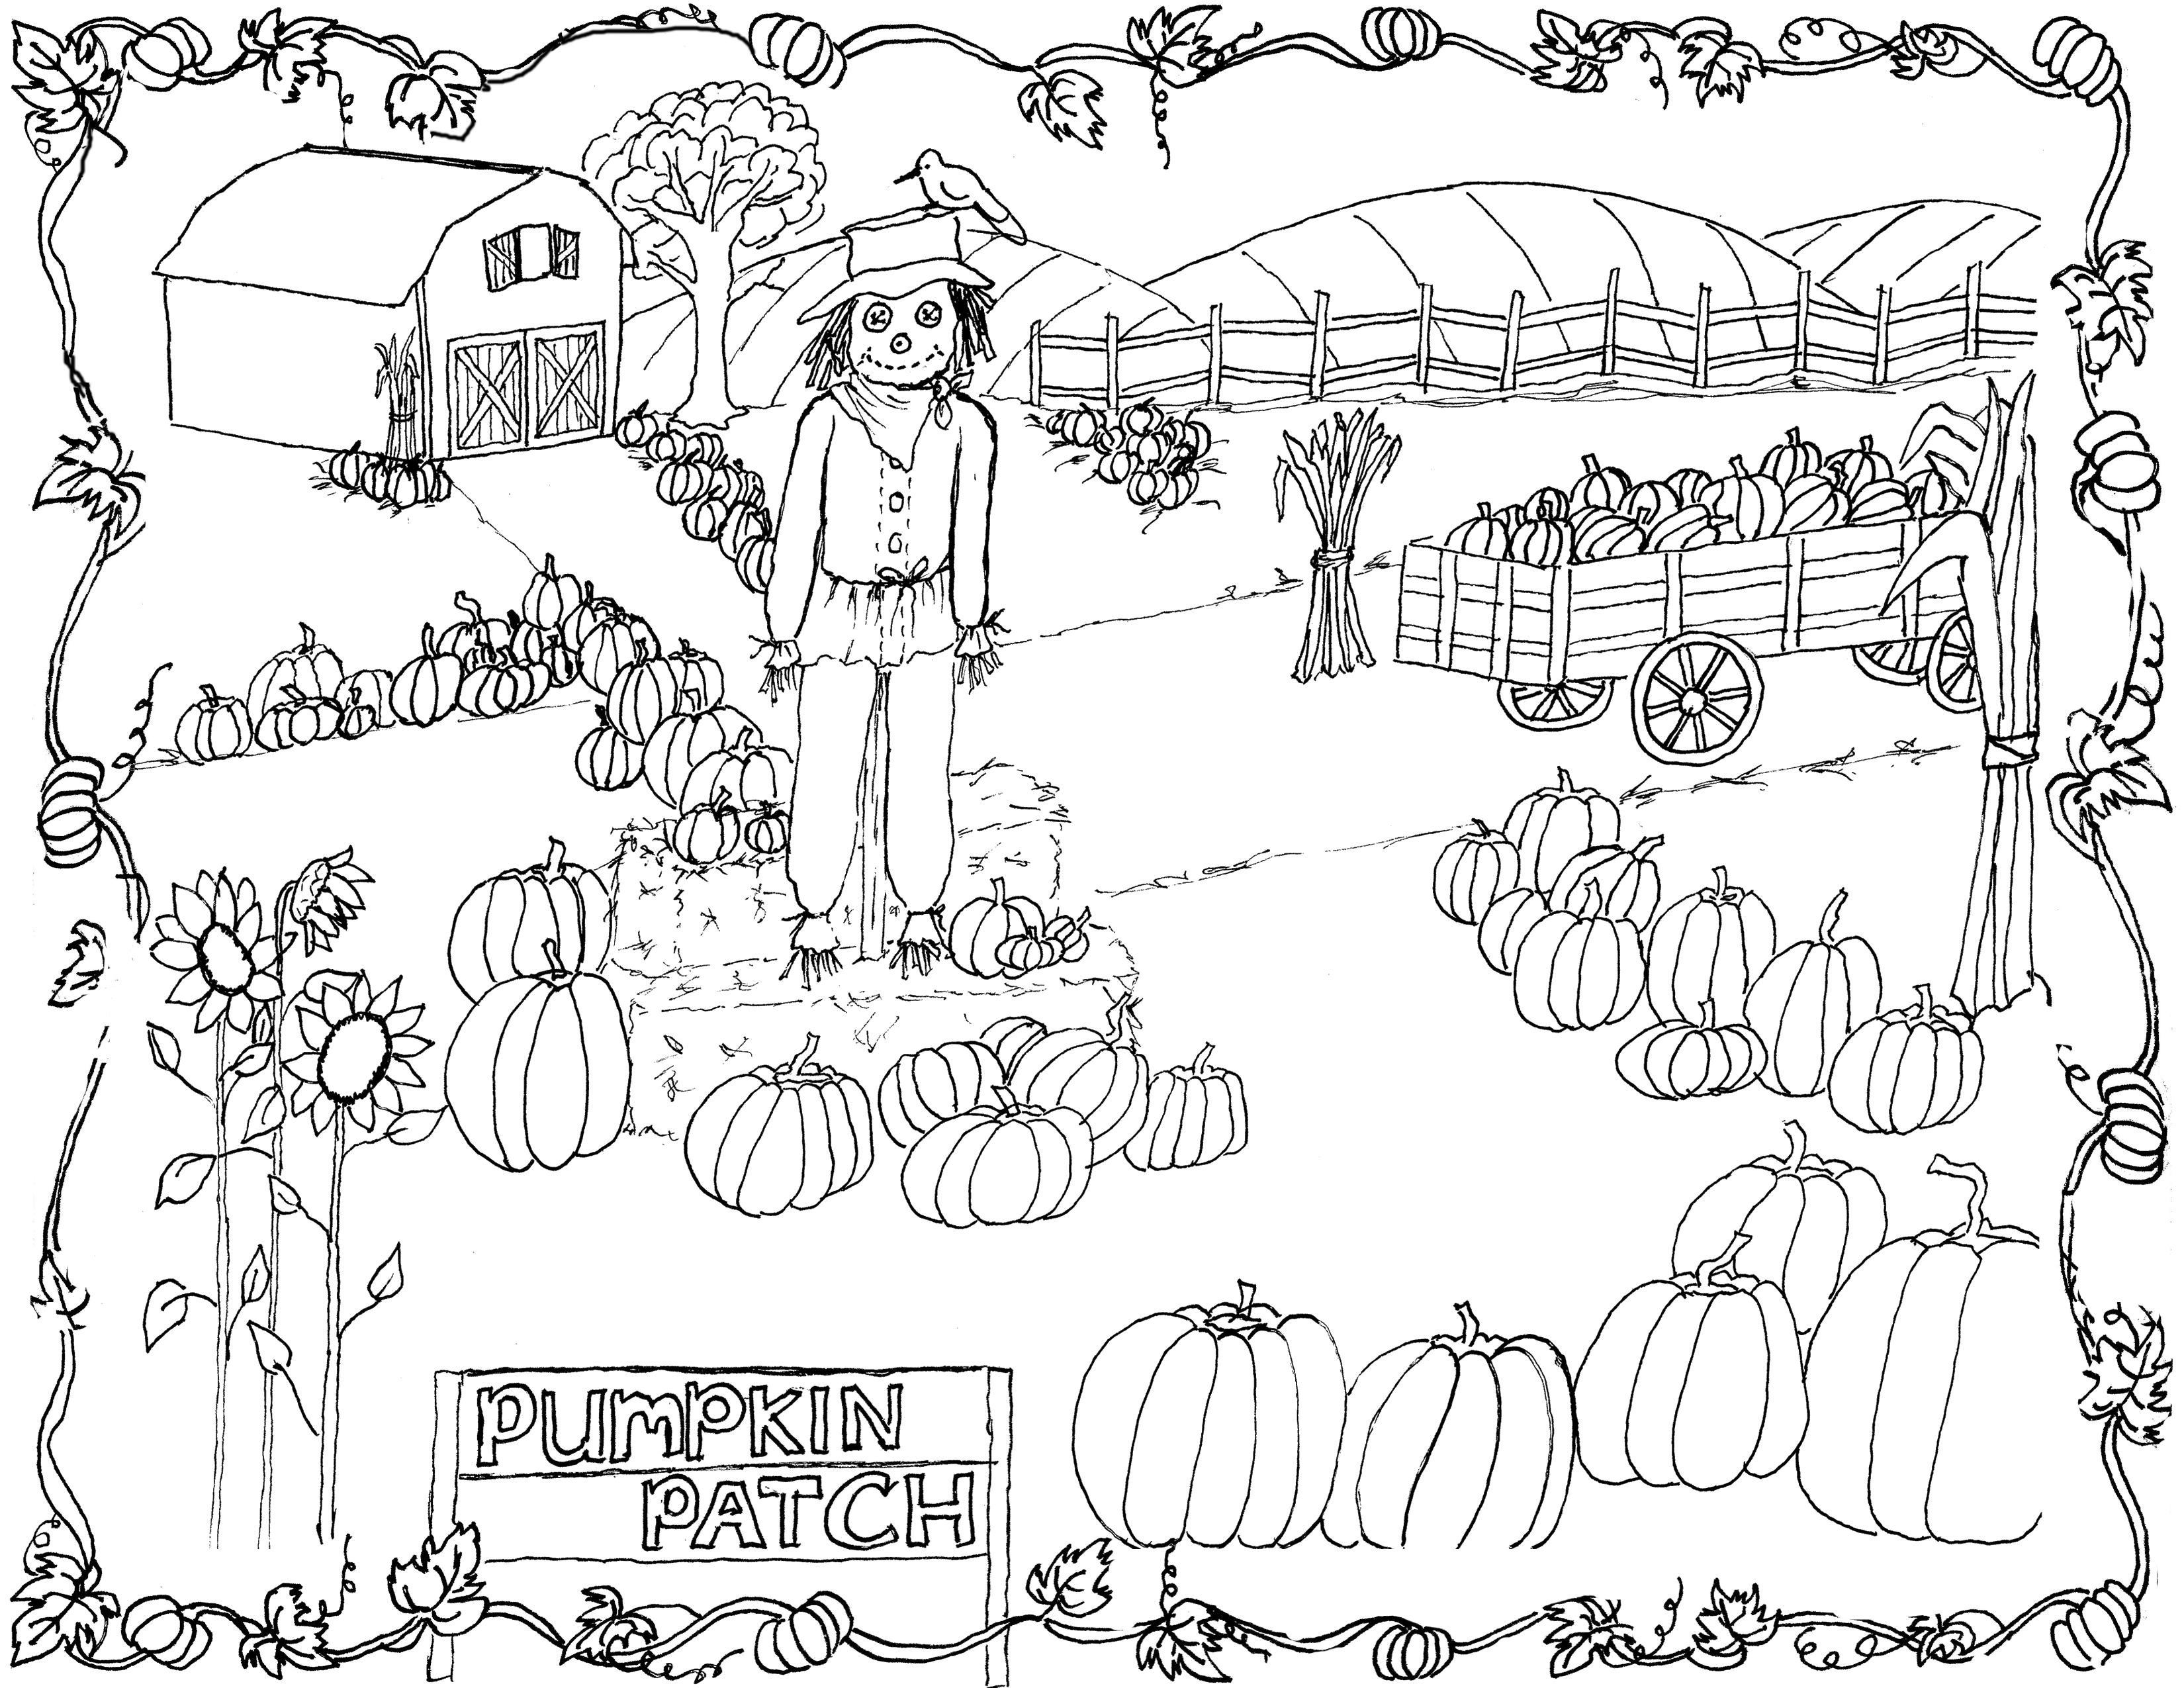 Amish Coloring Pages at GetColorings.com | Free printable colorings